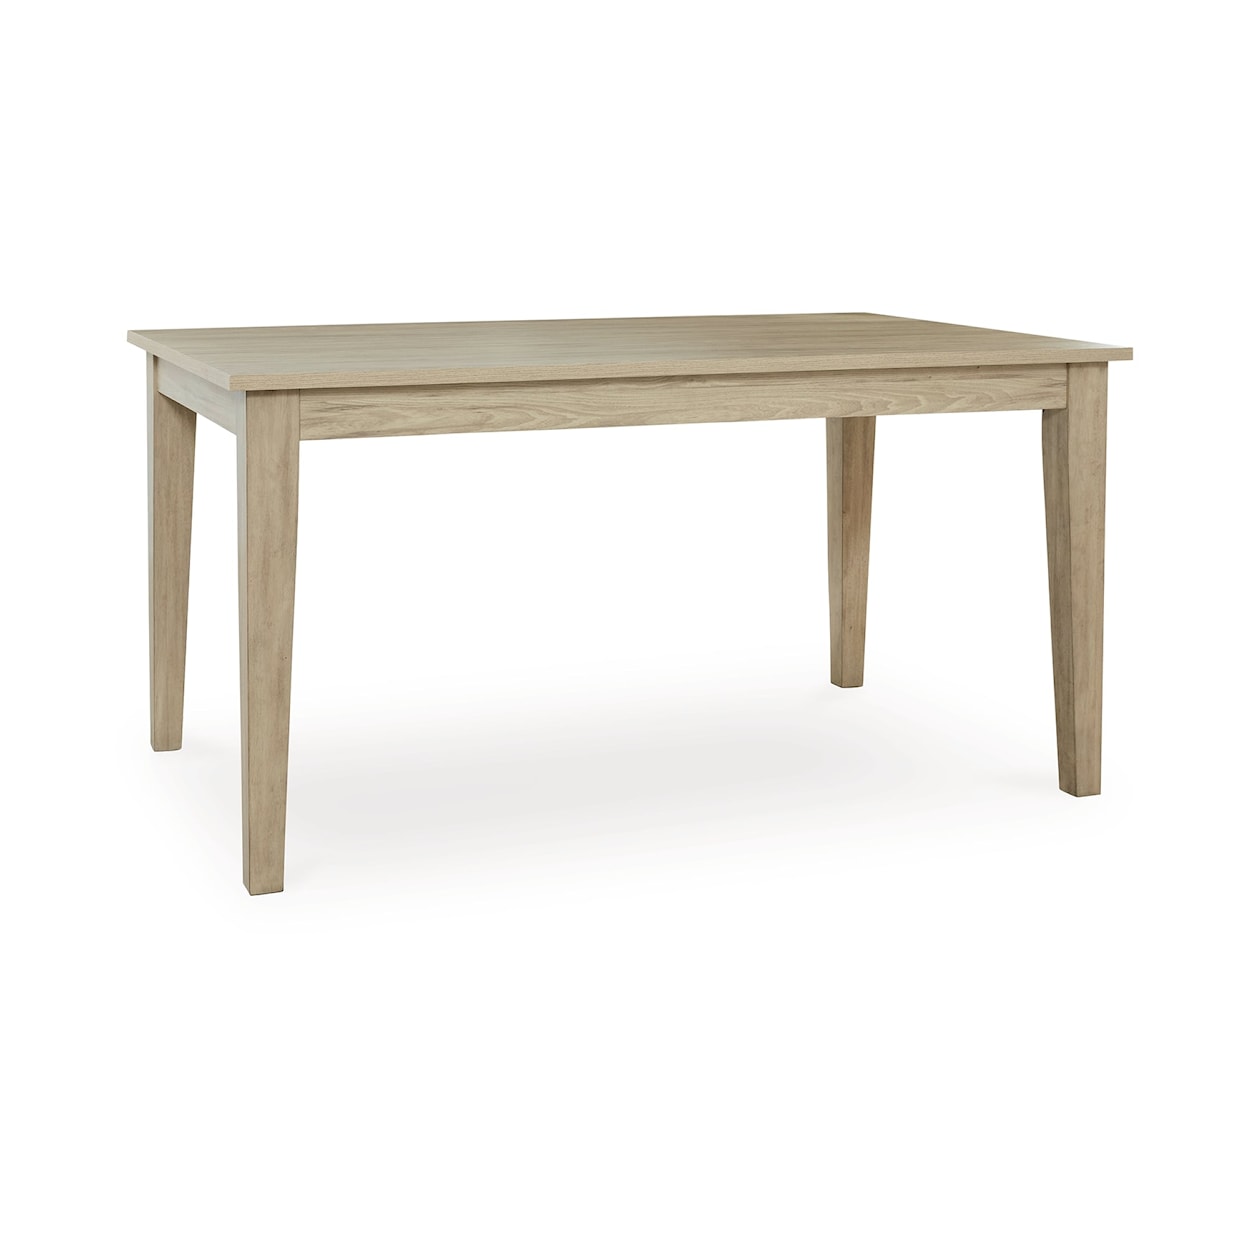 Benchcraft Gleanville Dining Table